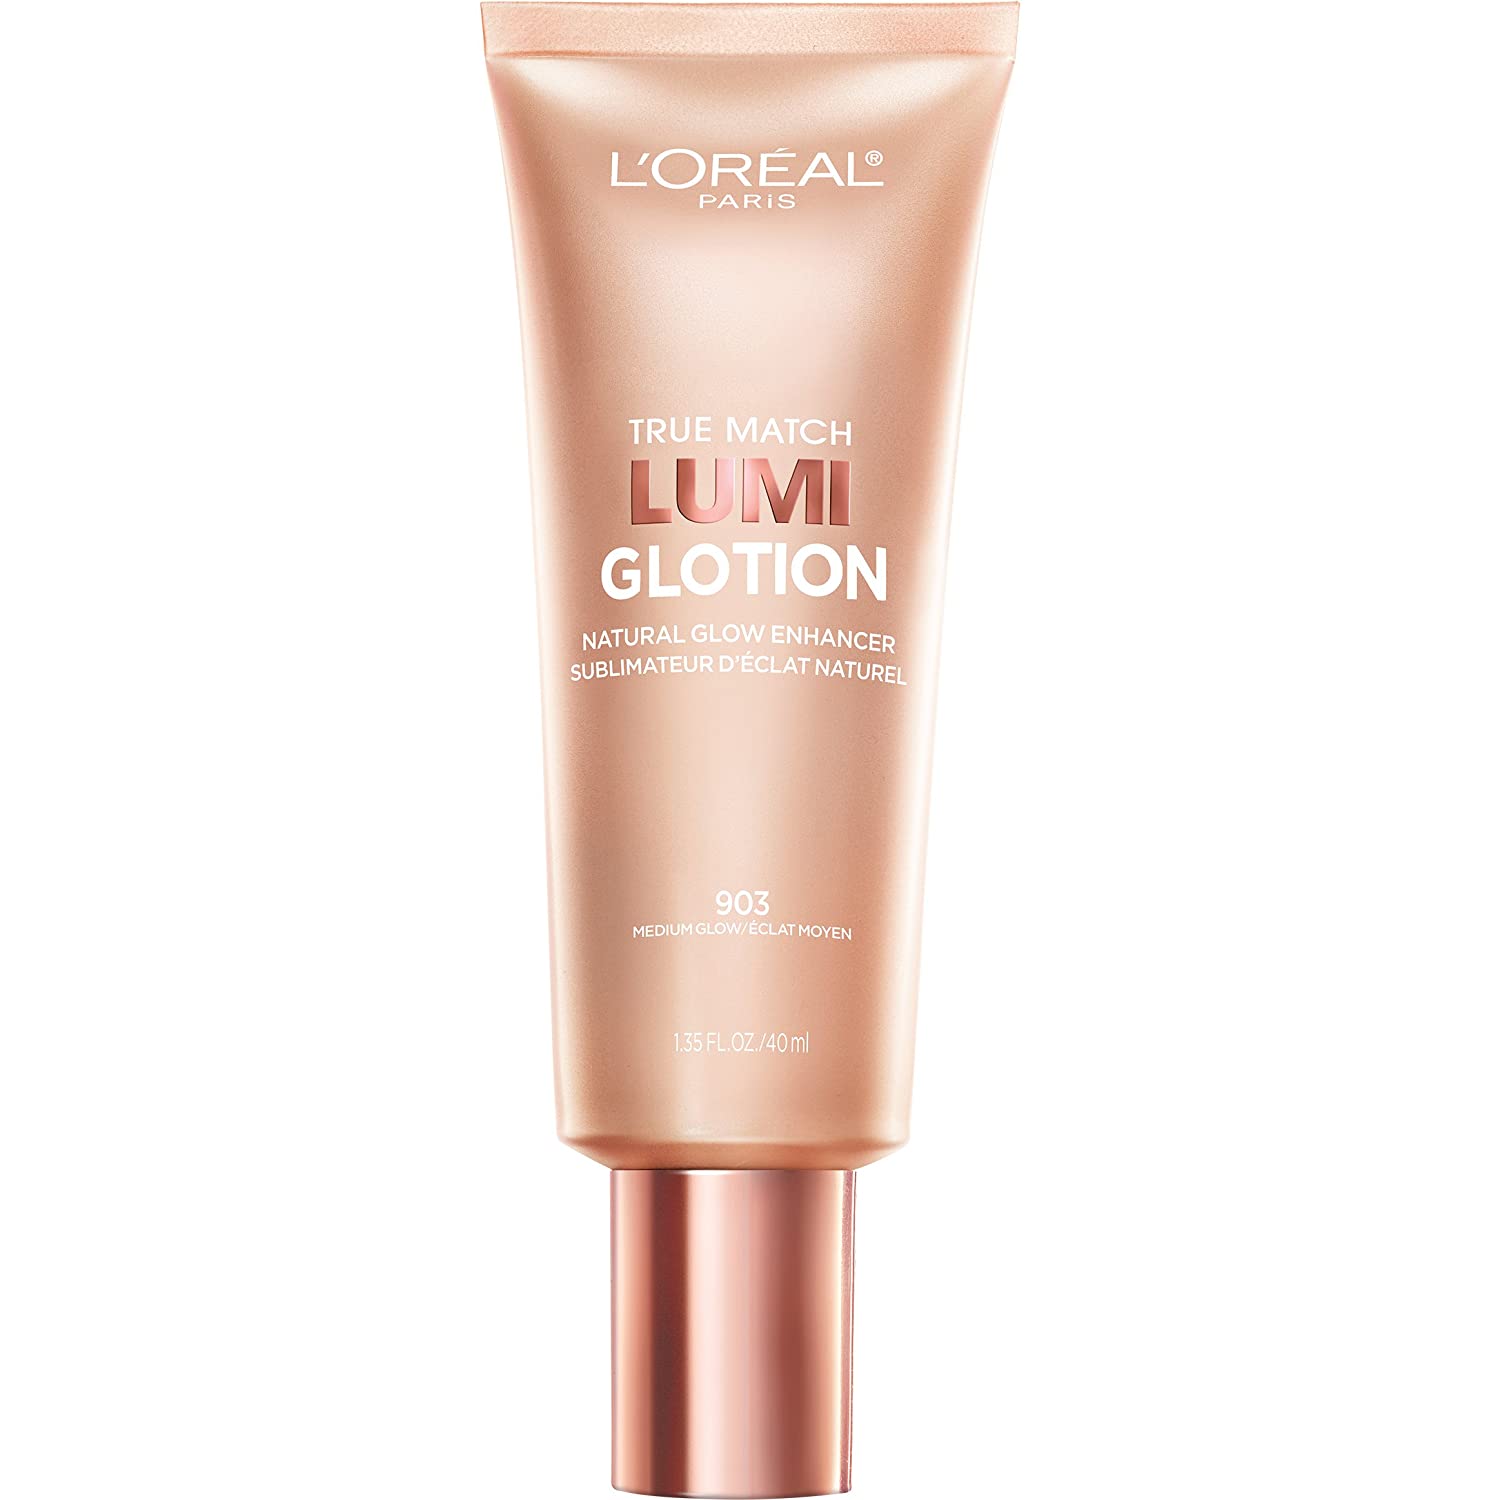 A bottle of L'Oreal Lumi Glotion foundation makeup.